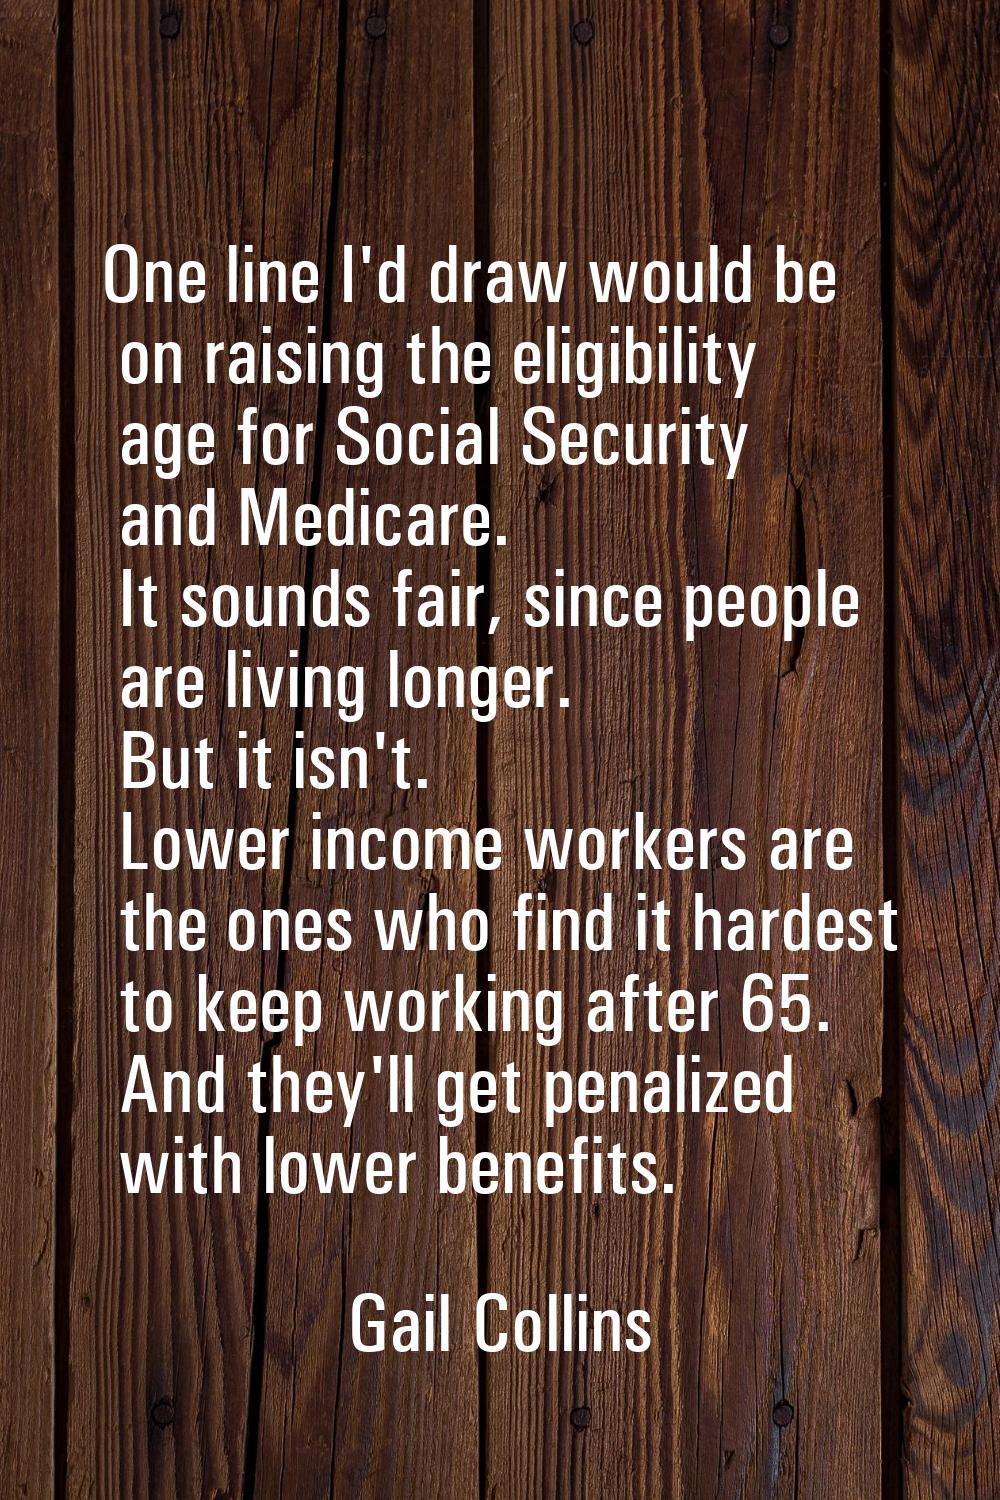 One line I'd draw would be on raising the eligibility age for Social Security and Medicare. It soun